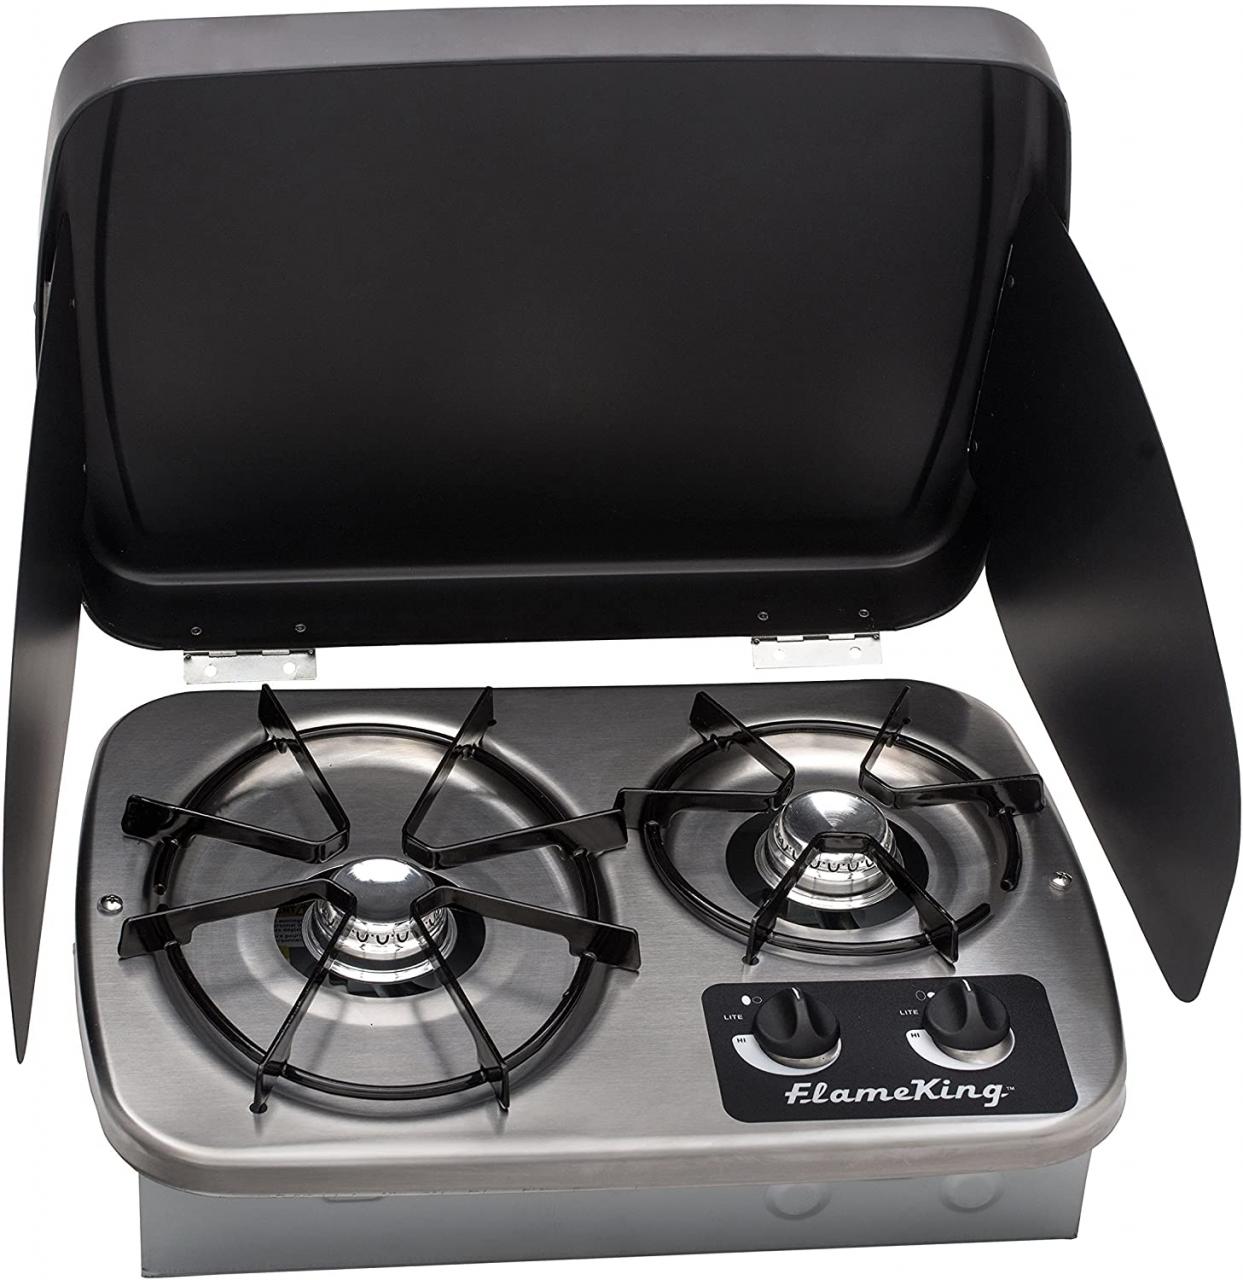 2 Burner Built-In RV Stove with wind shield, CSA approved Model #: YSNHT600  - Flame King